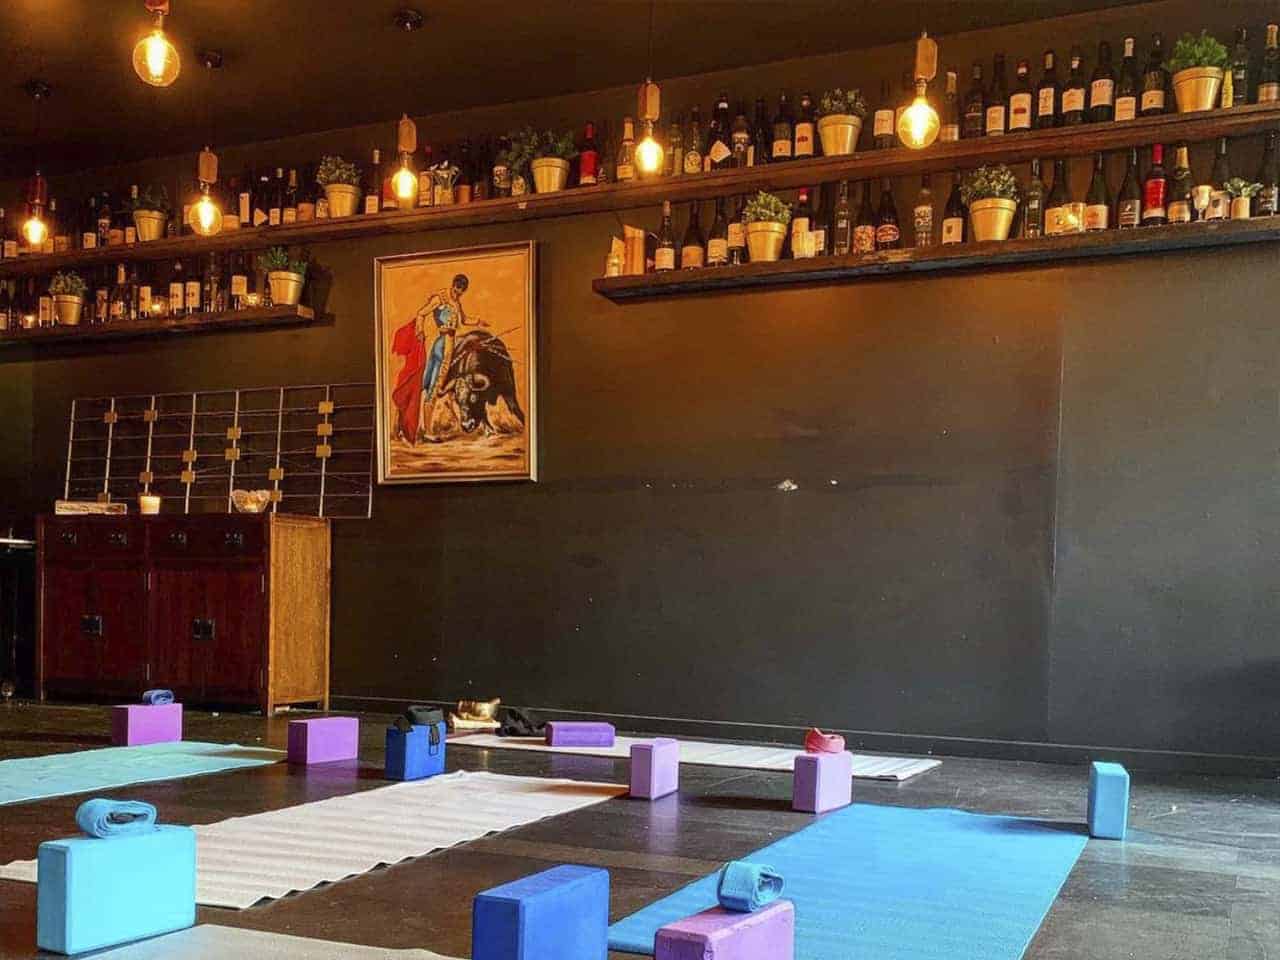 Private class and workshop space